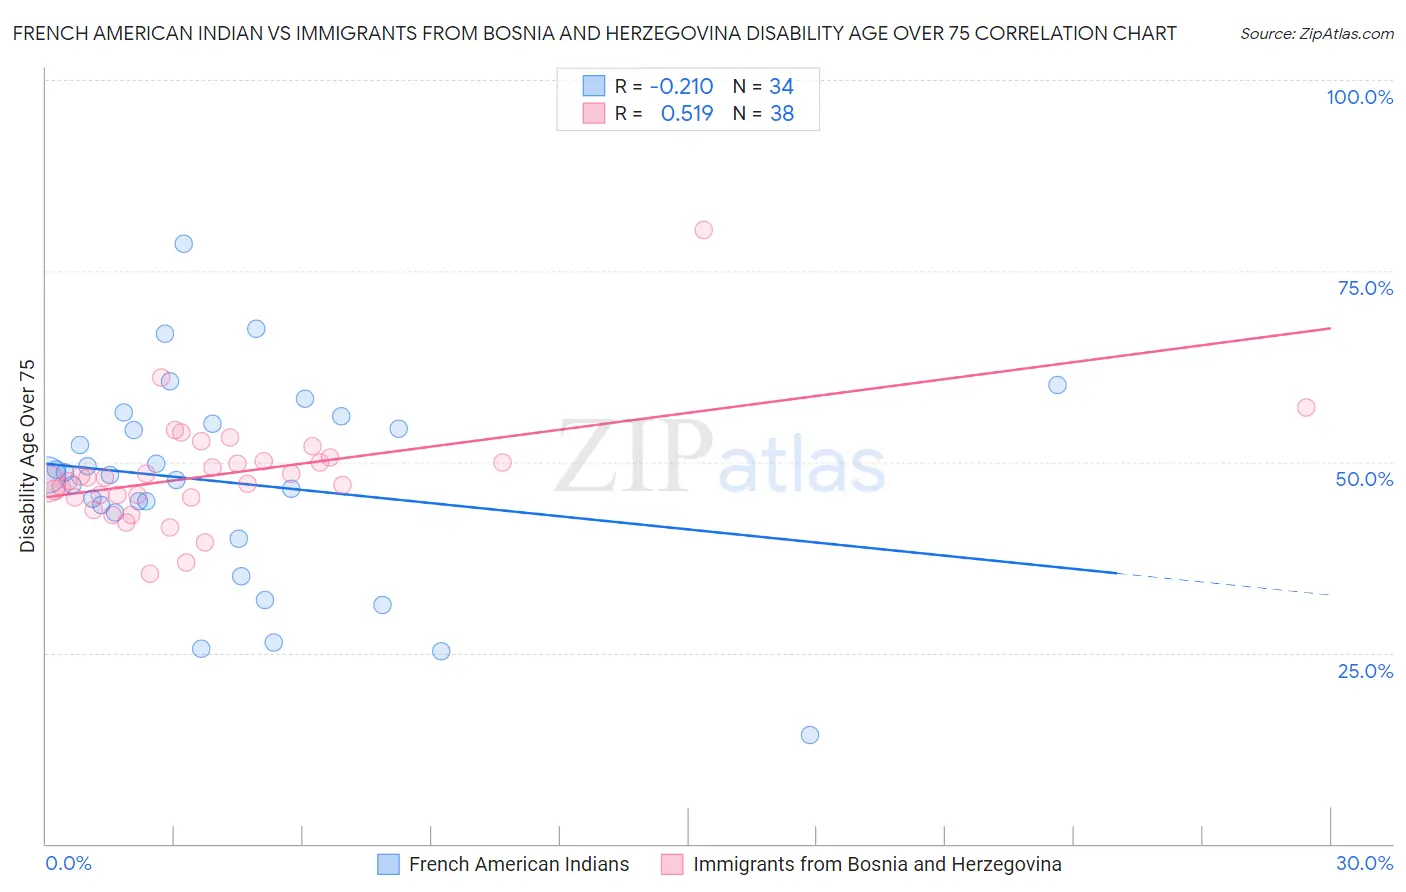 French American Indian vs Immigrants from Bosnia and Herzegovina Disability Age Over 75